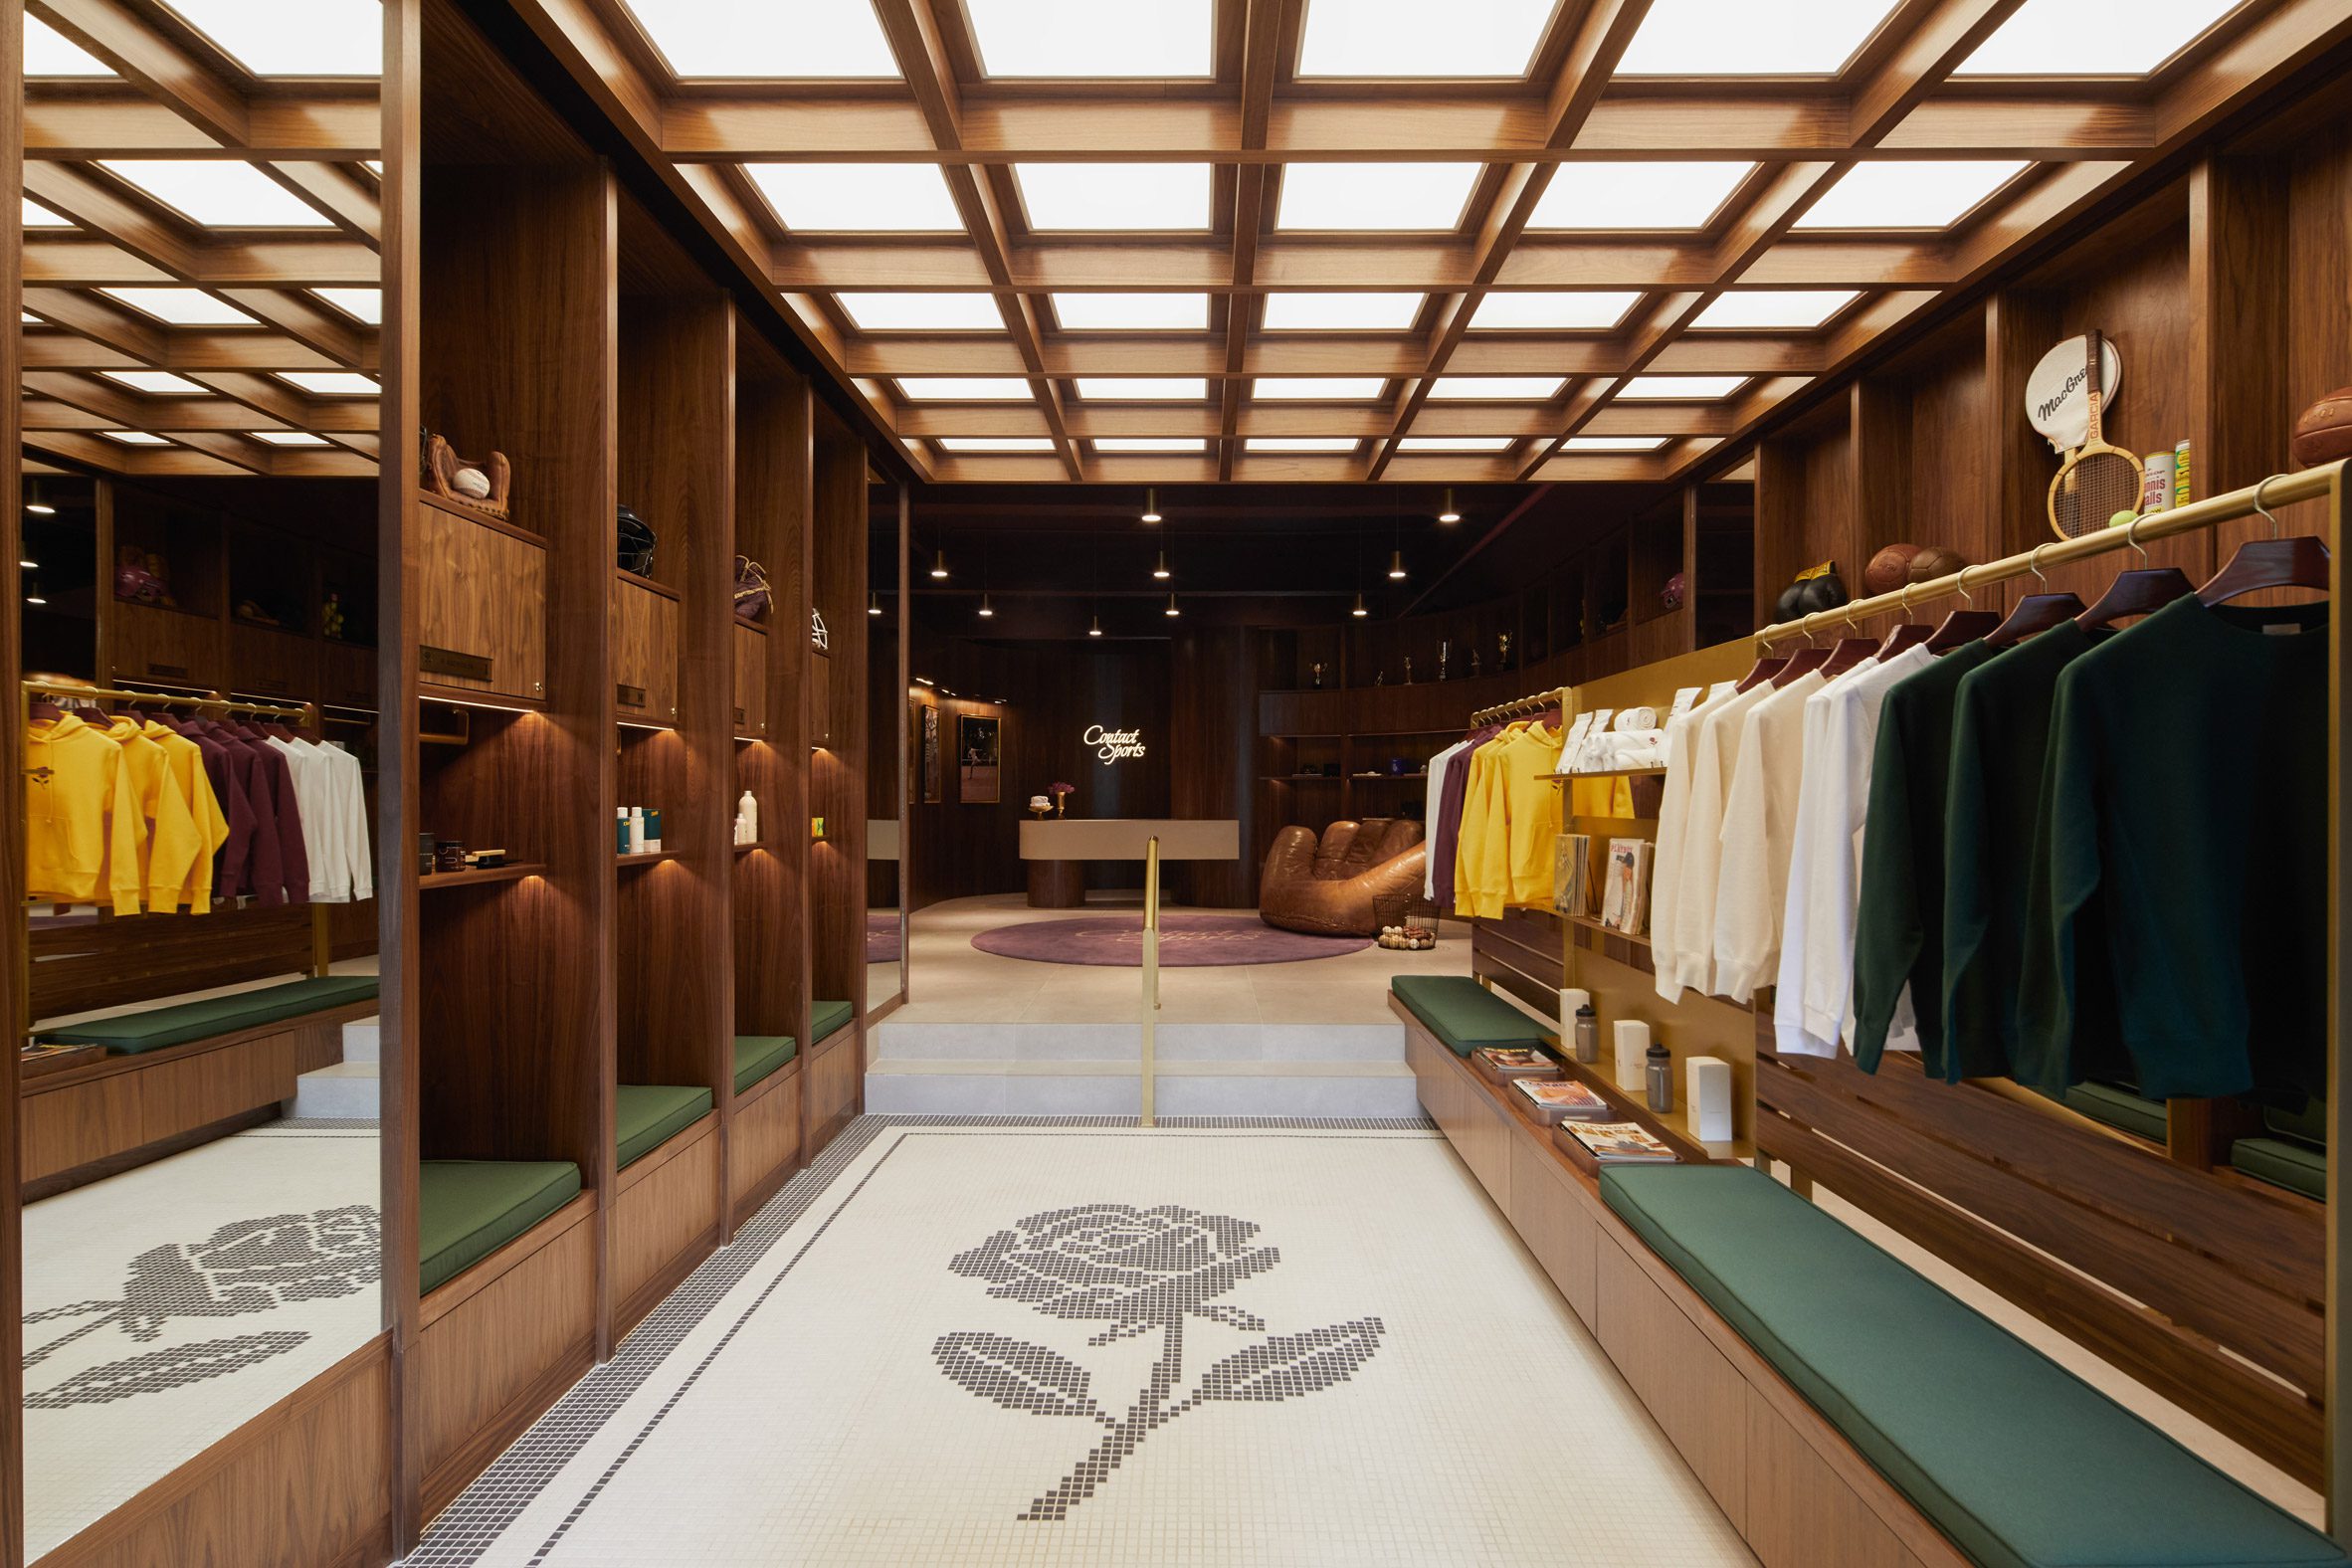 Store interior with walnut shelving and mosaic floor